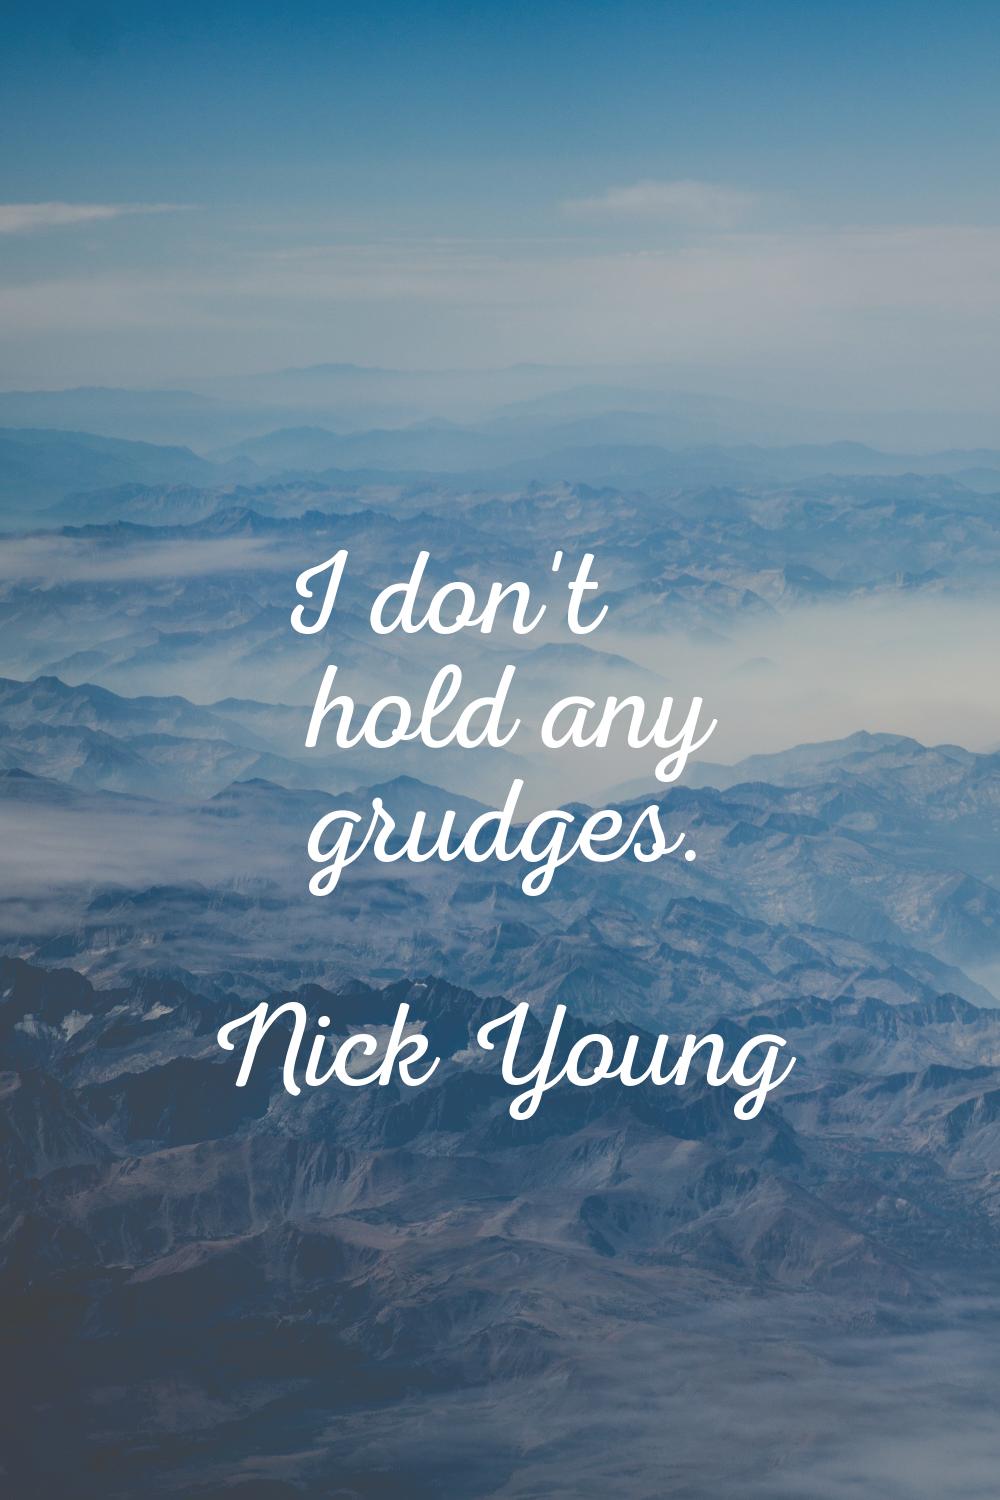 I don't hold any grudges.